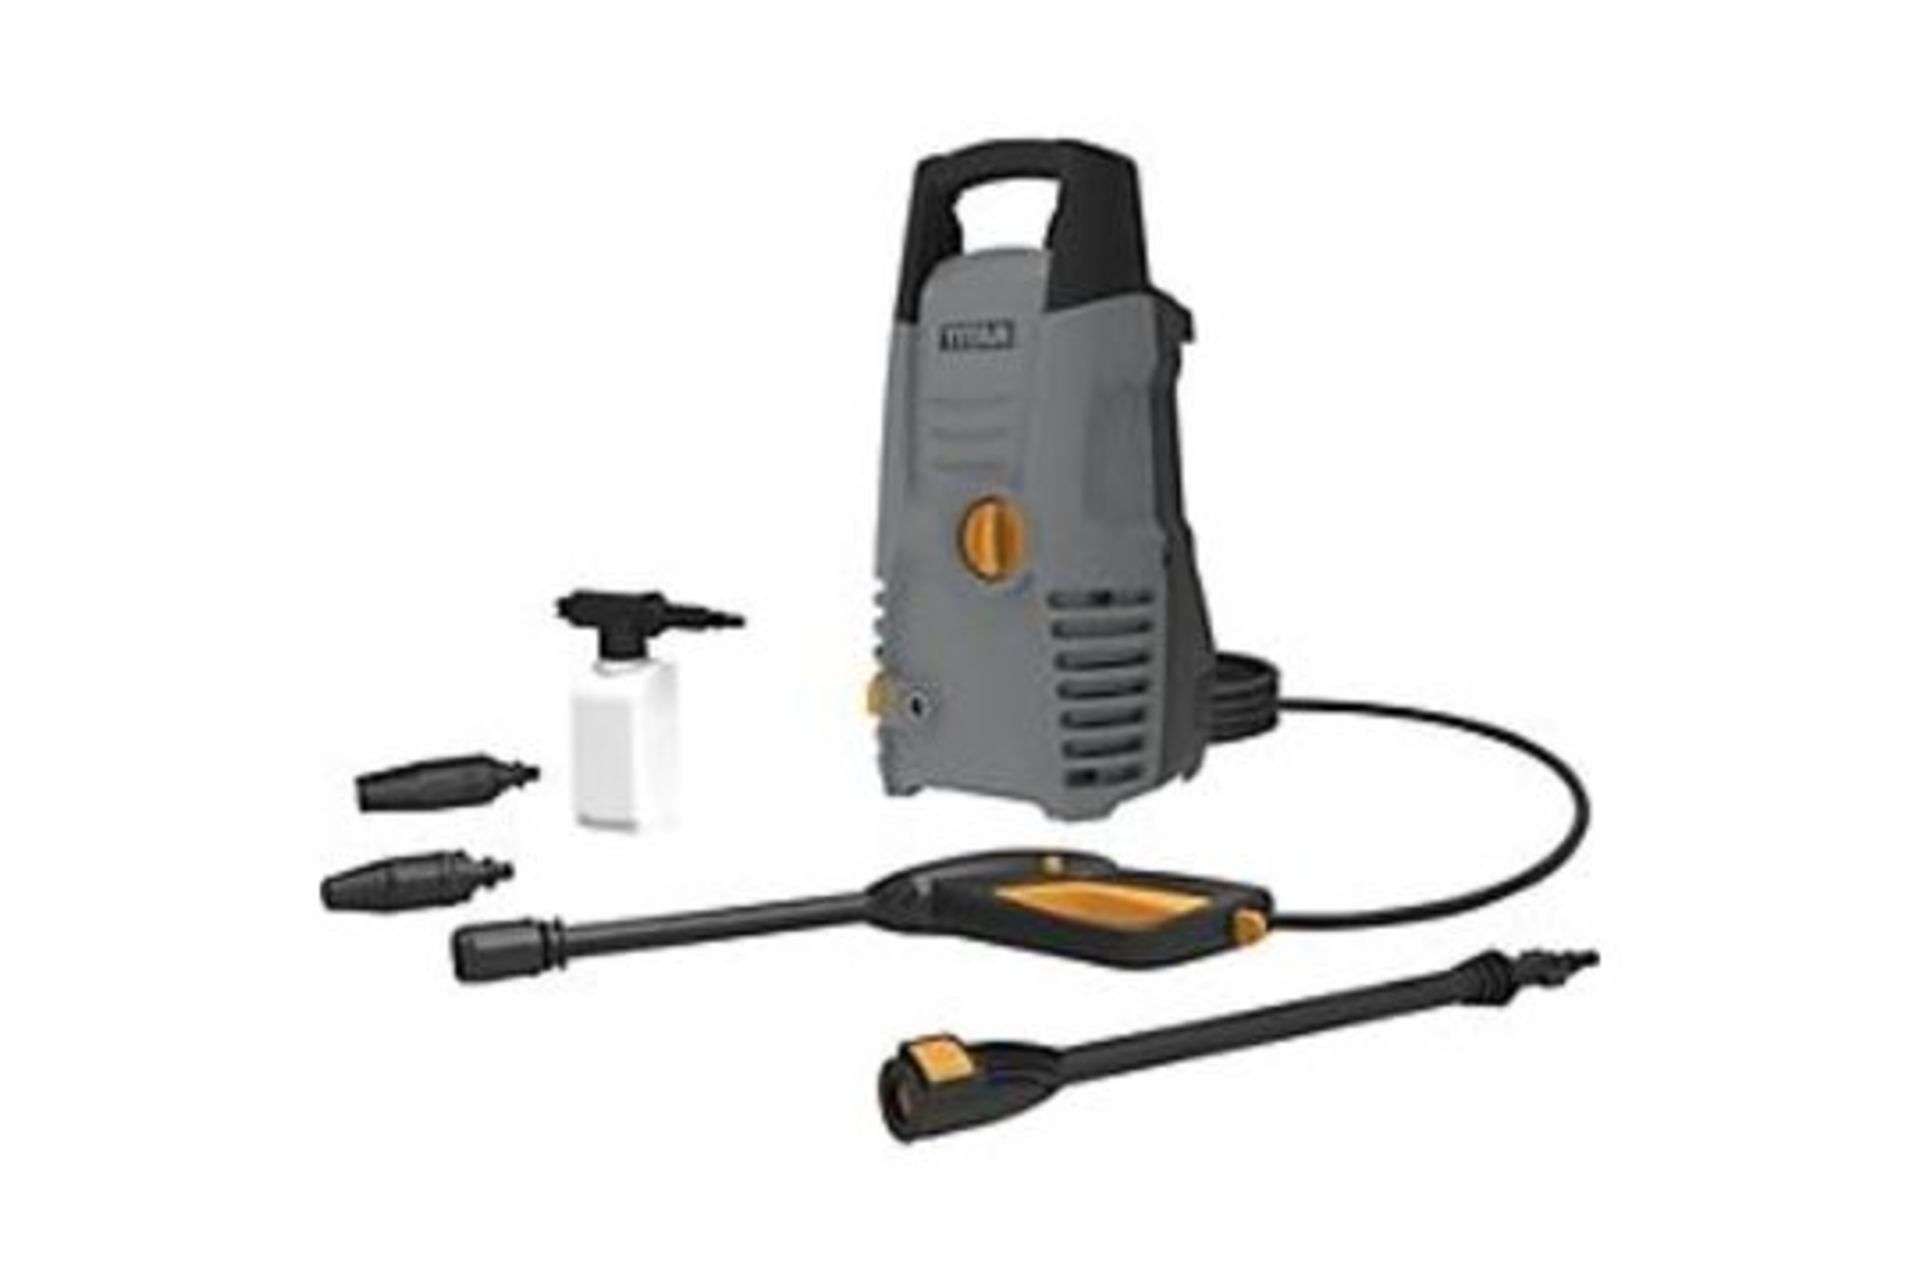 TITAN 100BAR ELECTRIC HIGH PRESSURE WASHER 1.3KW 230V. - R14.9. Compact design with space-saving